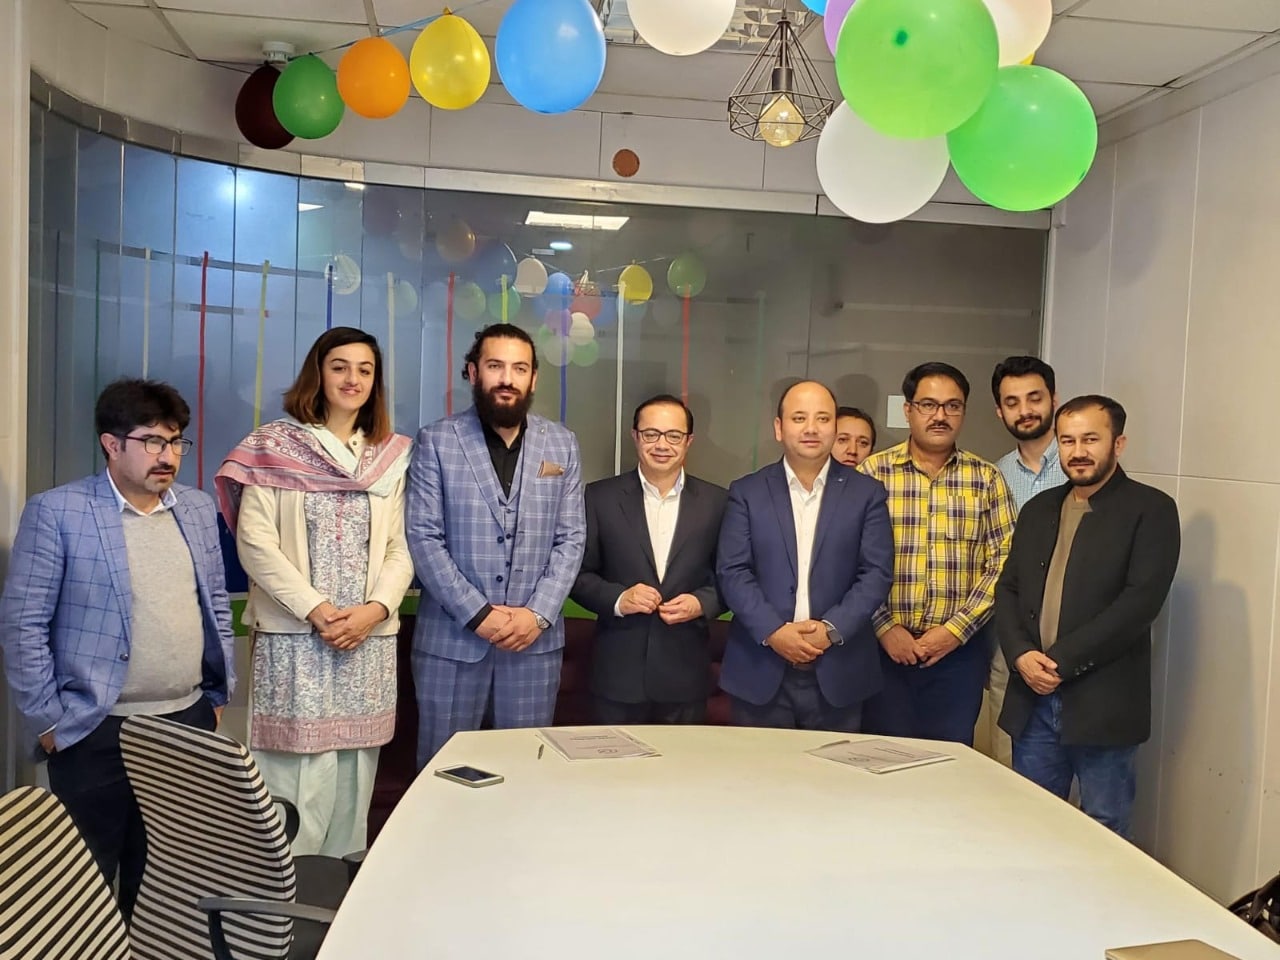 Pakistani Online Vacation Rental Startup Raises Rs. 50 Million in Seed Financing Round